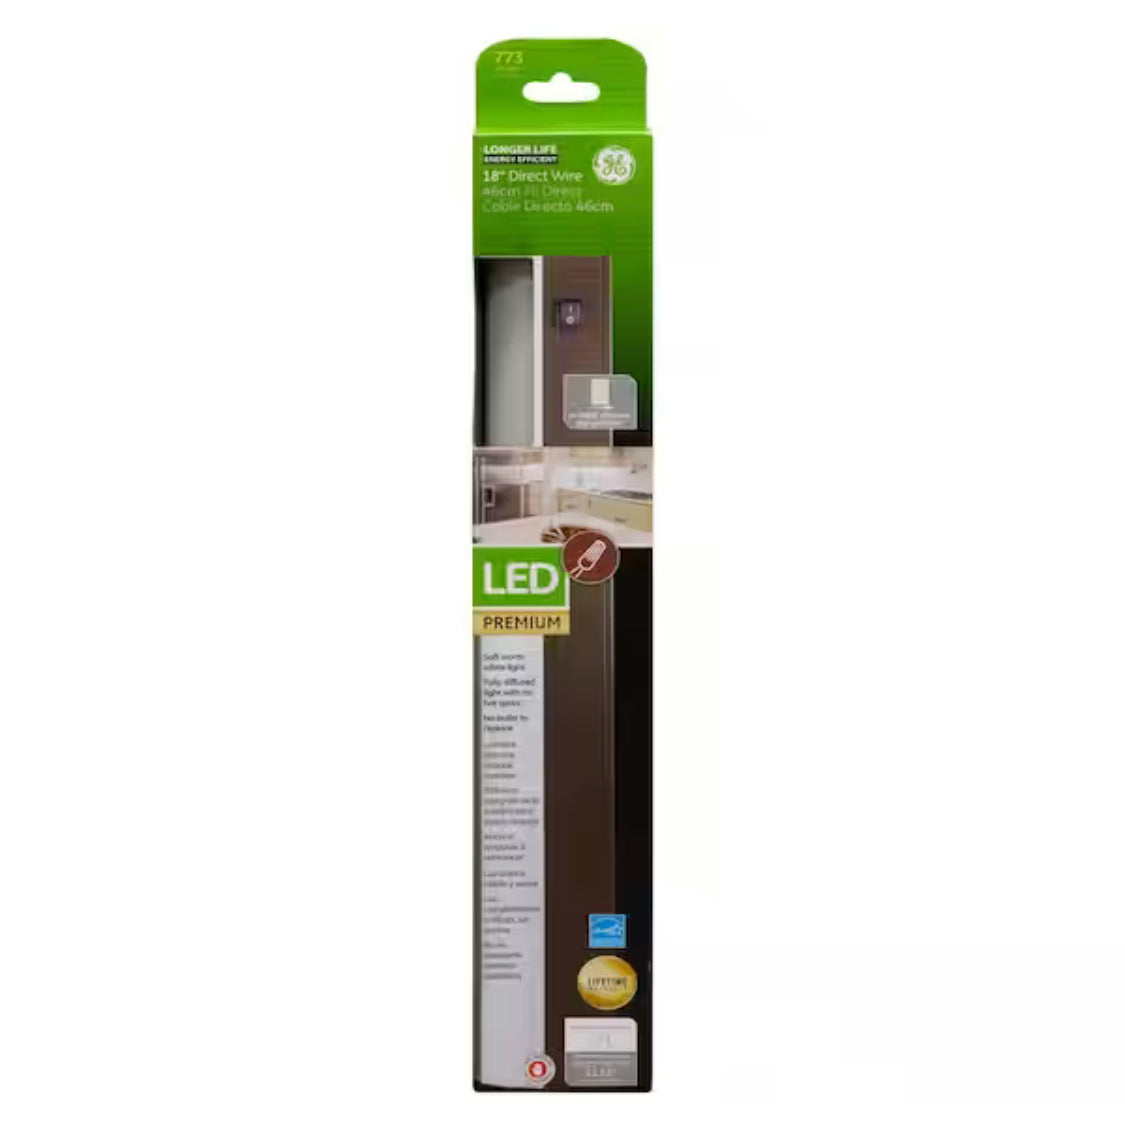 GE 18 in. Premium LED Direct Wire Dimmable Oil-Rubbed Bronze Under Cabinet Light - Damaged Box